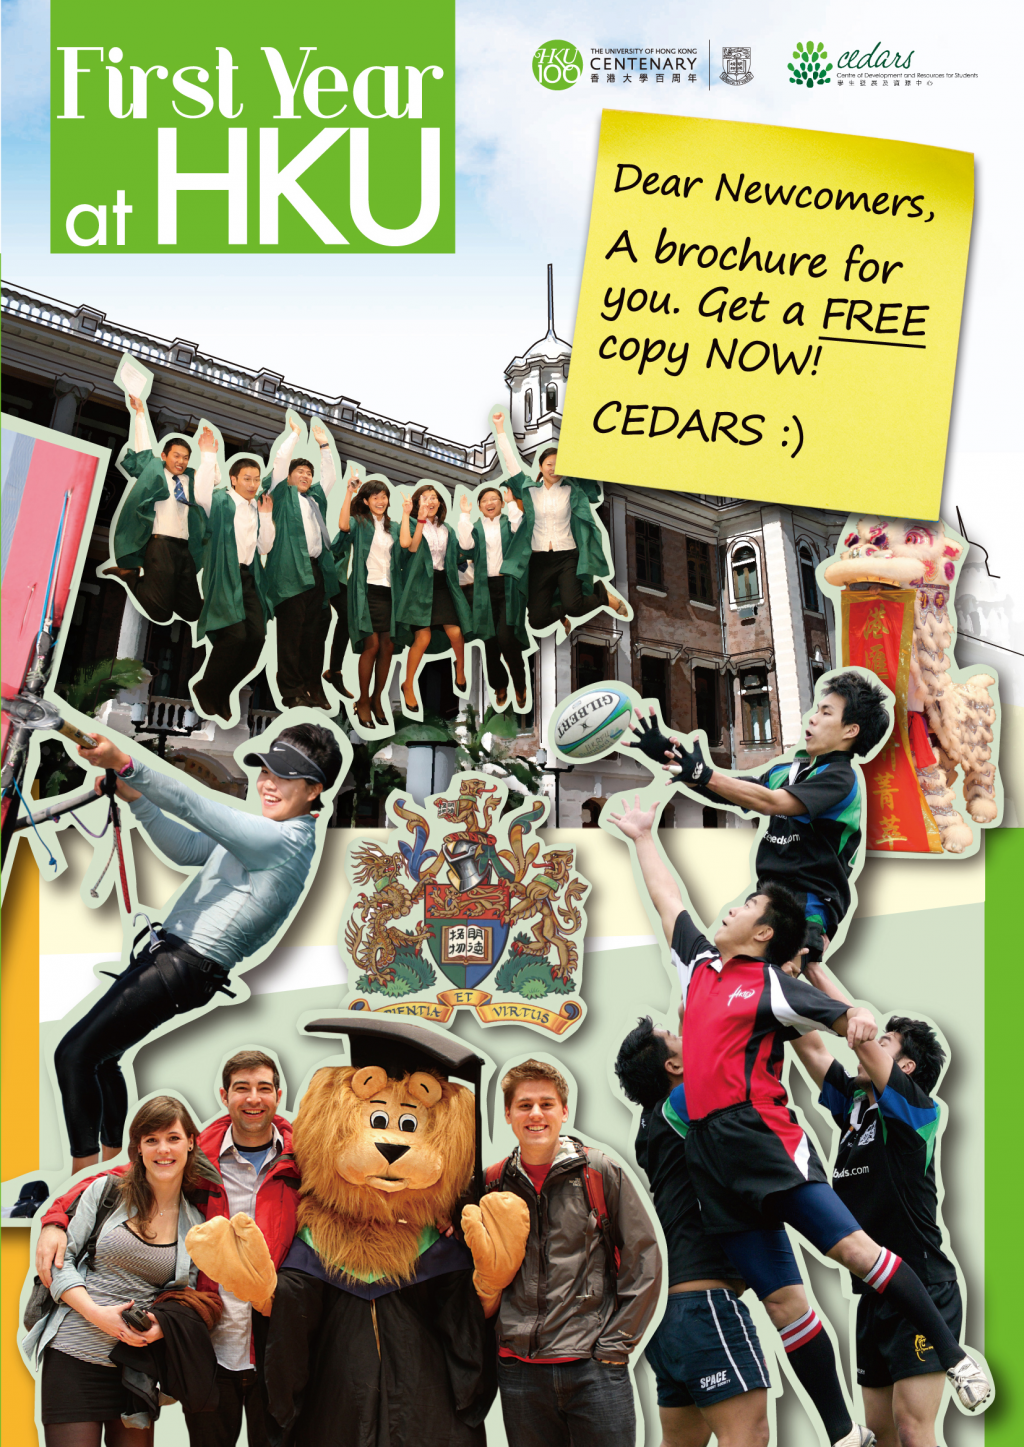 First Year at HKU brochure